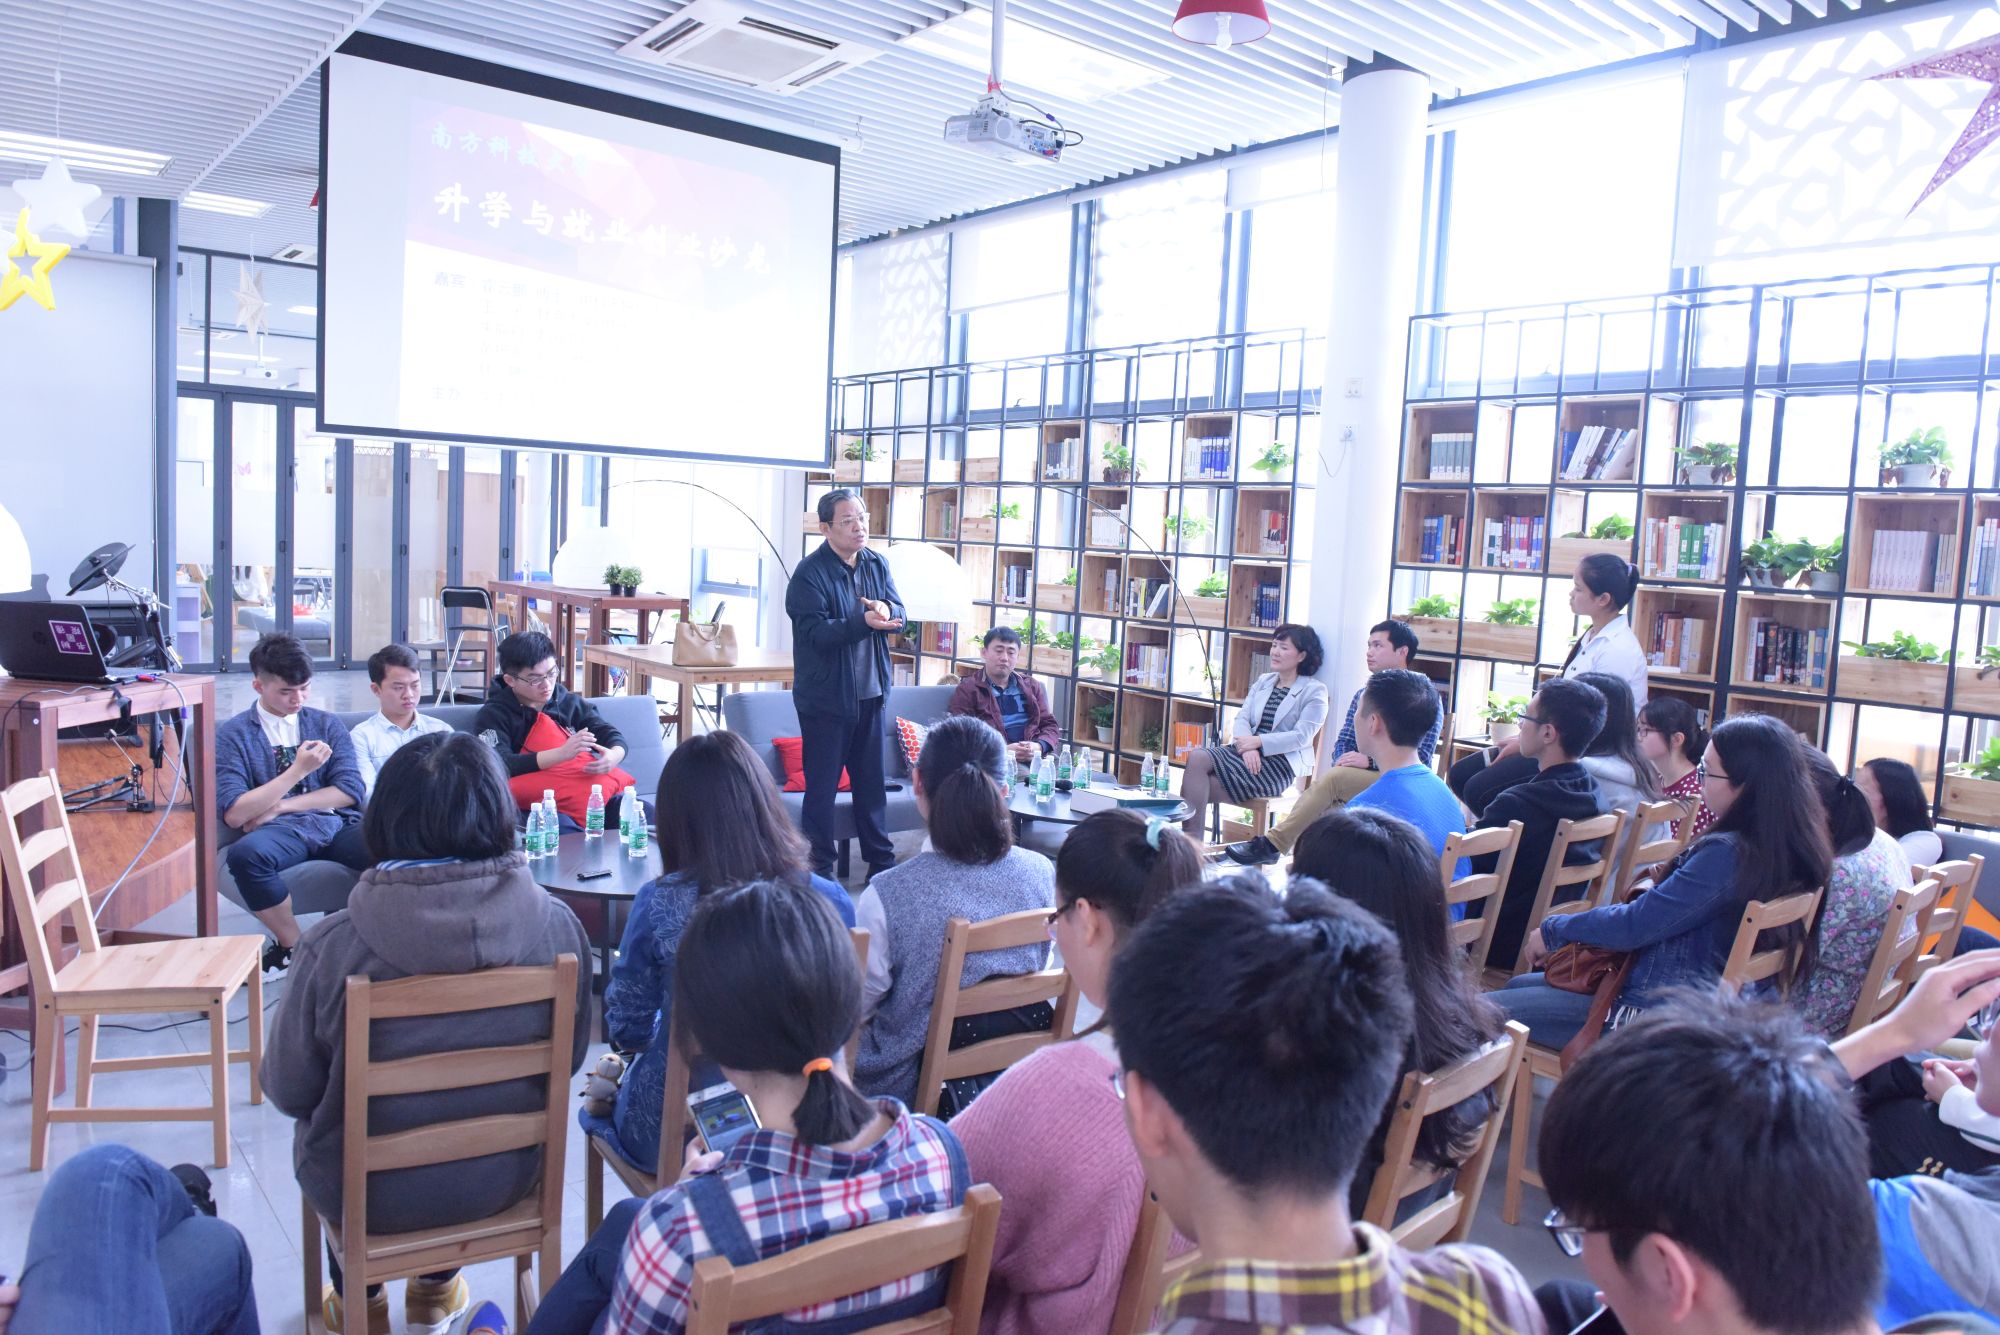 The graduate sharing workshop: Graduates shared stories, famous entrepreneur became the carrer counselor